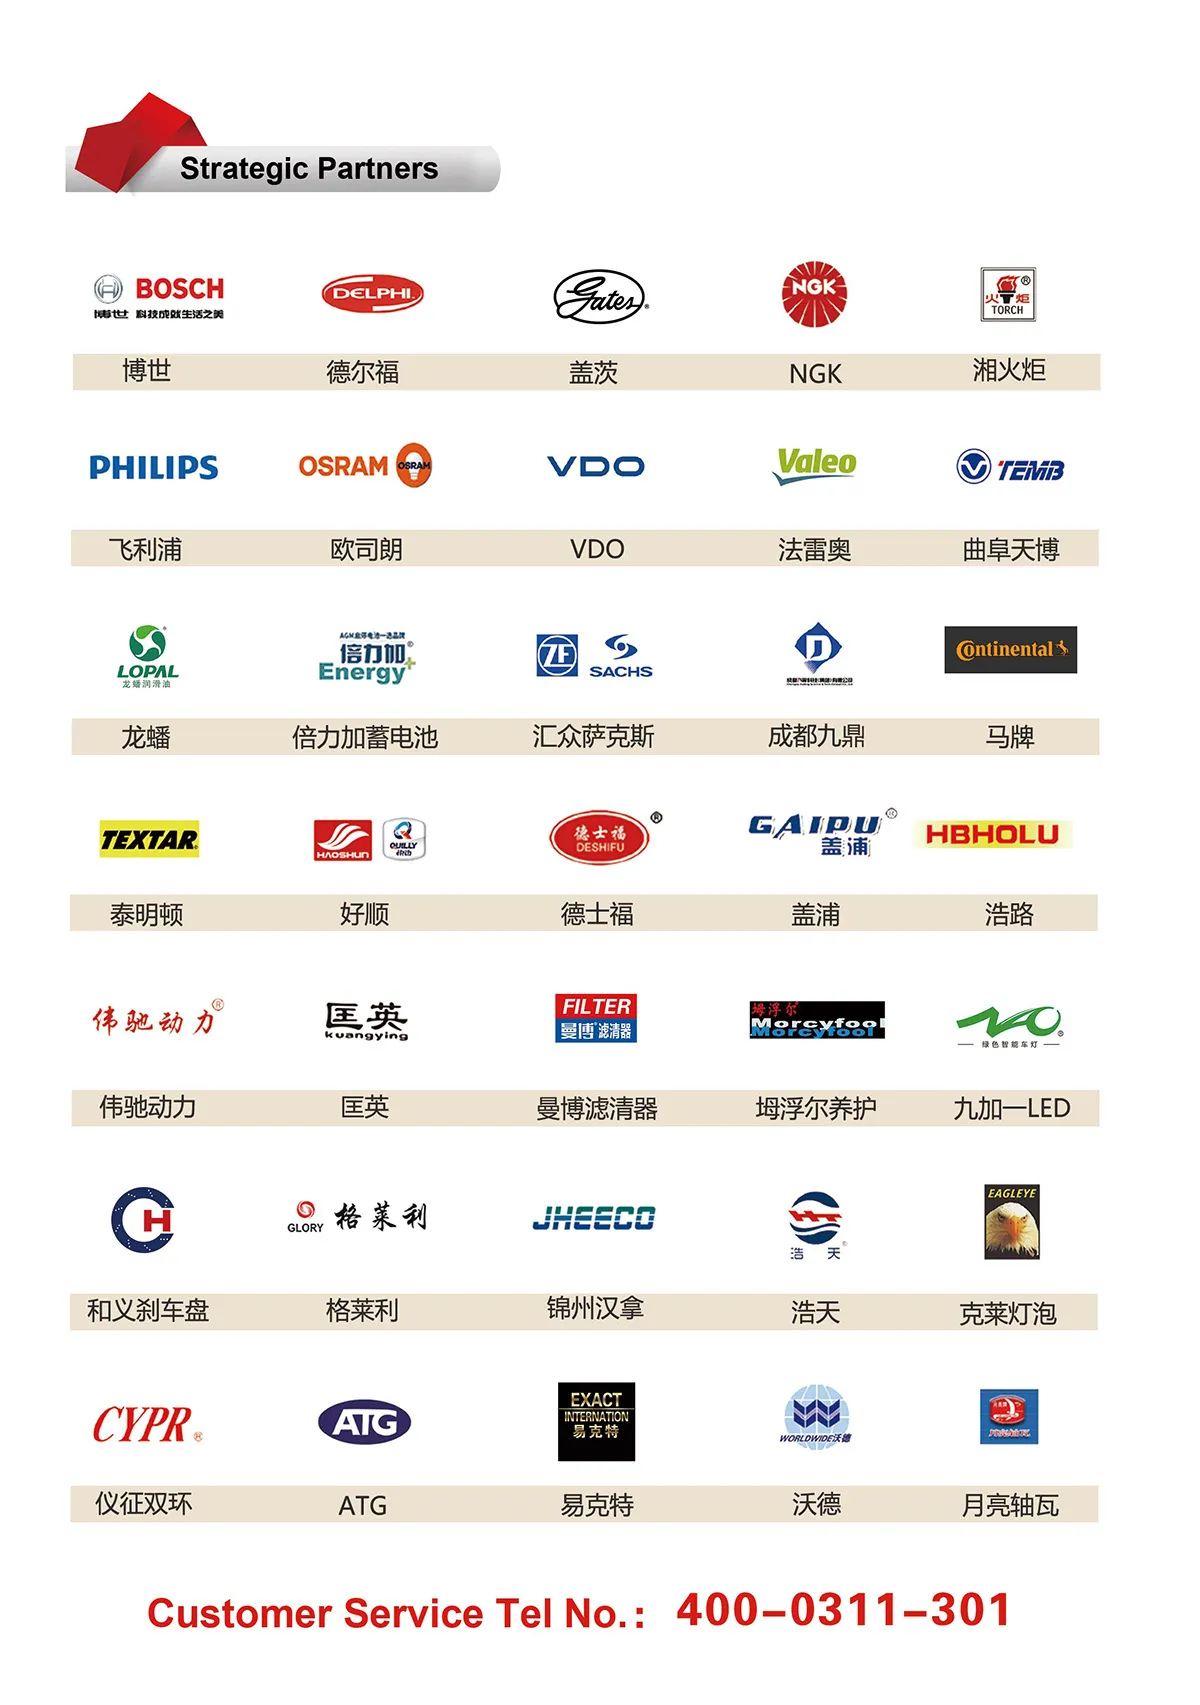 Cooperated Brands and Chinese Brands